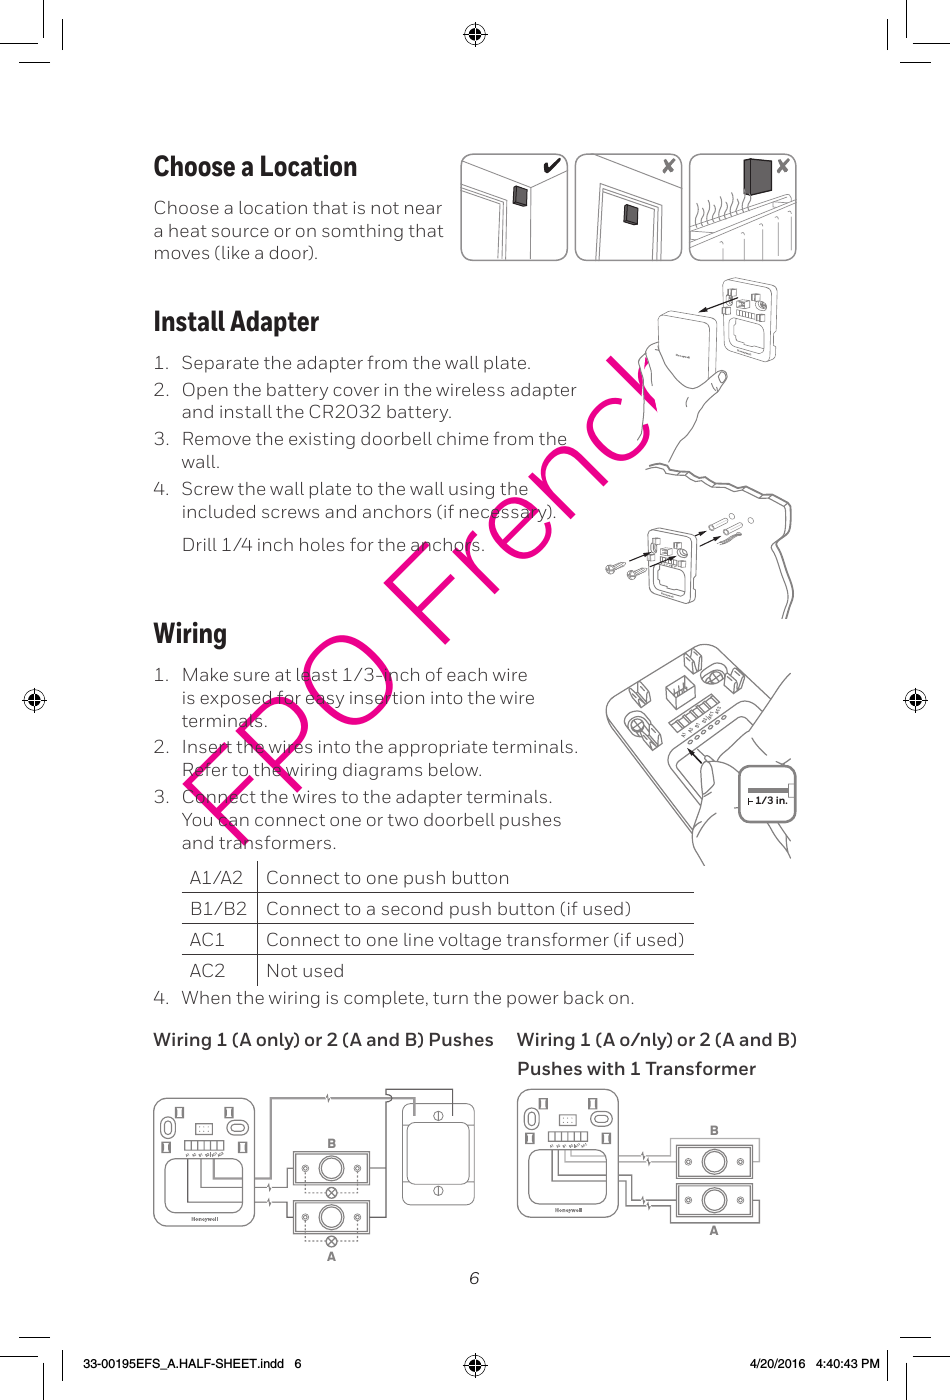 6FPO FrenchWiring1.  Make sure at least 1/3-inch of each wire is exposed for easy insertion into the wire terminals. Insert the wires into the appropriate terminals. Refer to the wiring diagrams below. 3.  Connect the wires to the adapter terminals. You can connect one or two doorbell pushes and transformers. Connect to one push button Connect to a second push button (if used)AC1 Connect to one line voltage transformer (if used) Not used When the wiring is complete, turn the power back on.1/3 in.ABABWiring 1 (A only) or 2 (A and B) Pushes Wiring 1 (A o/nly) or 2 (A and B) Pushes with 1 TransformerInstall Adapter1.  Separate the adapter from the wall plate. Open the battery cover in the wireless adapter 3.  Remove the existing doorbell chime from the wall. Screw the wall plate to the wall using the included screws and anchors (if necessary). Choose a LocationChoose a location that is not near a heat source or on somthing that moves (like a door). 33-00195EFS_A.HALF-SHEET.indd   6 4/20/2016   4:40:43 PM